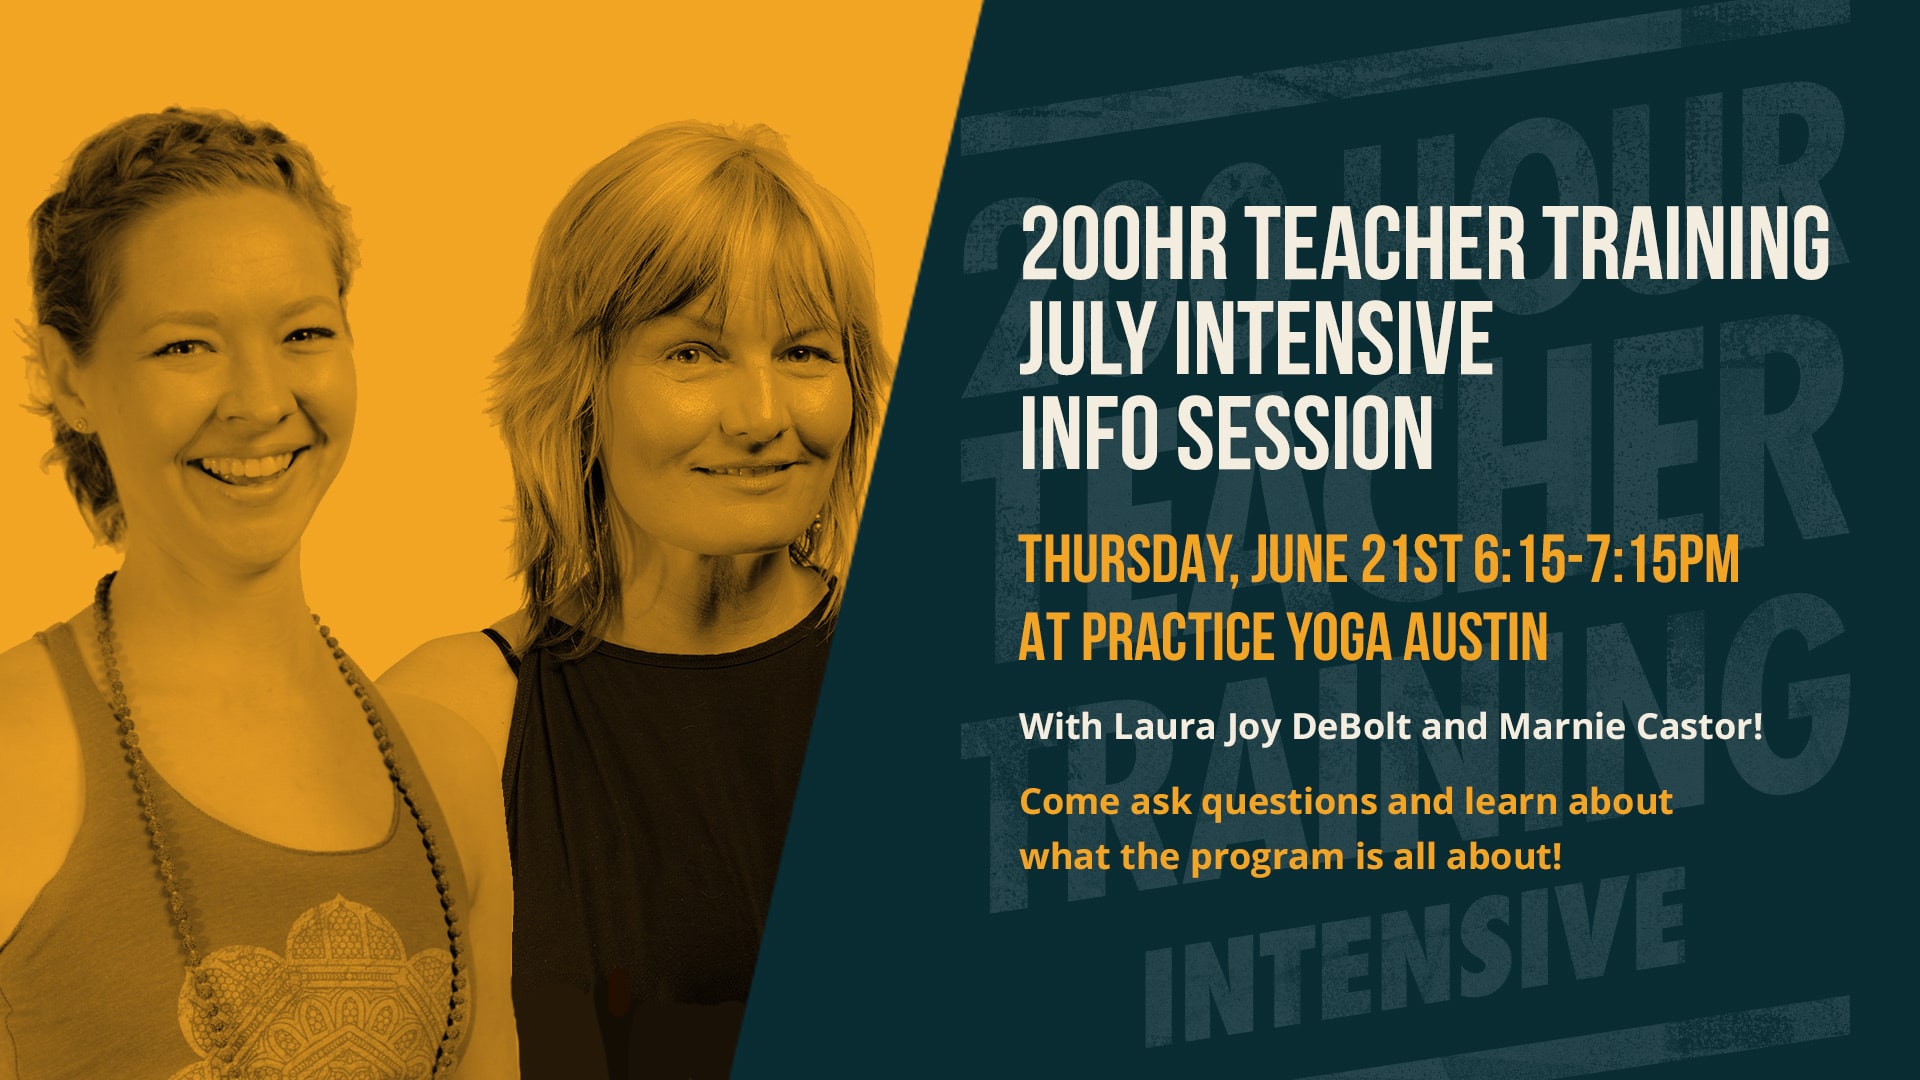 Practice Yoga Austin 200 Hour July Intensive Q&A Info Session